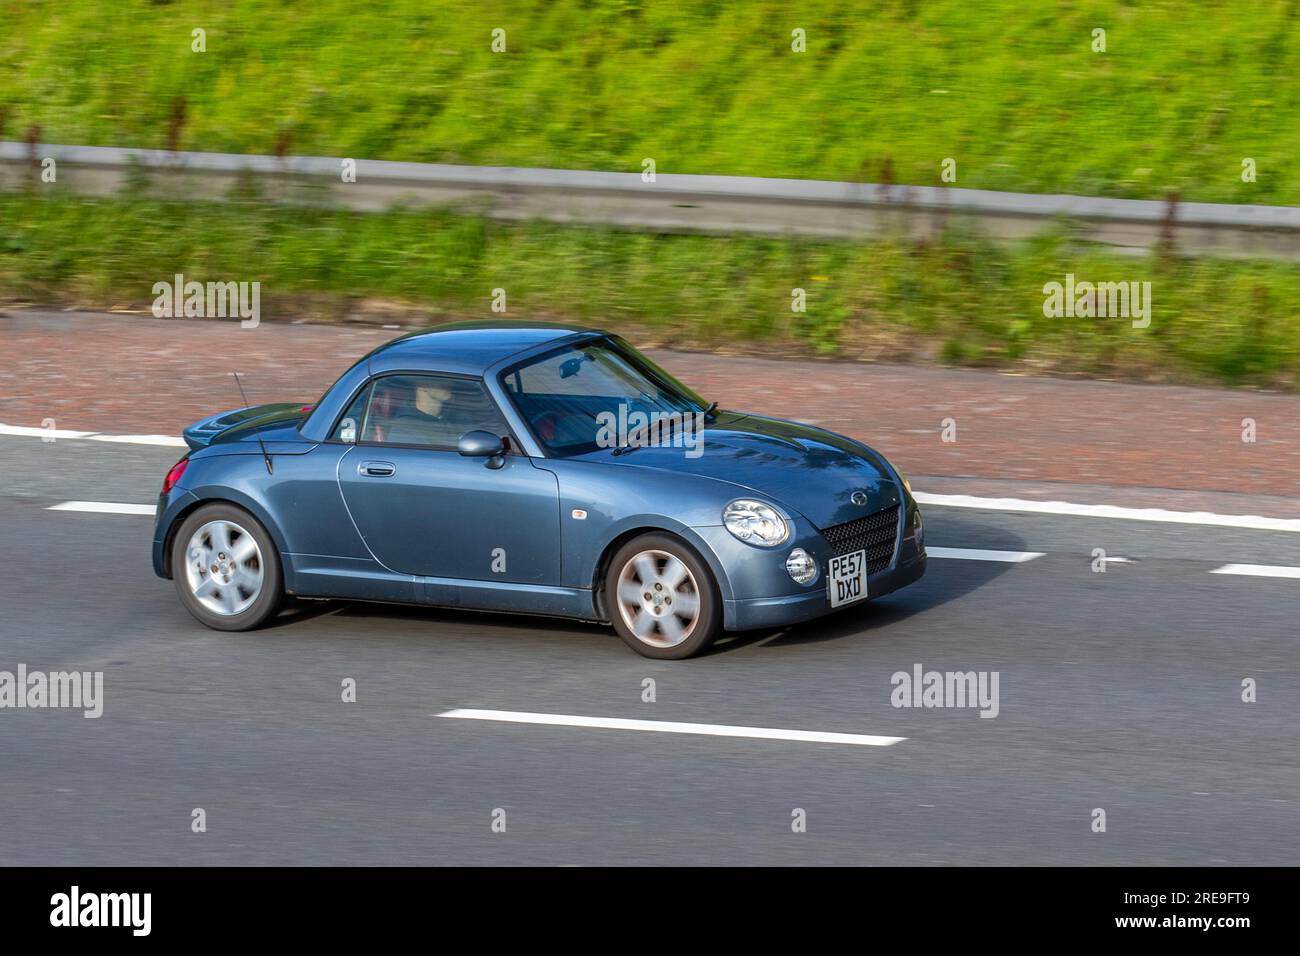 2007 Blue Grey Daihatsu Copen DVVT Car Roadster Petrol 1298 cc,  funky little convertible, 2-door kei car with a metal folding roof, travelling on the M6 motorway in Greater Manchester, UK Stock Photo